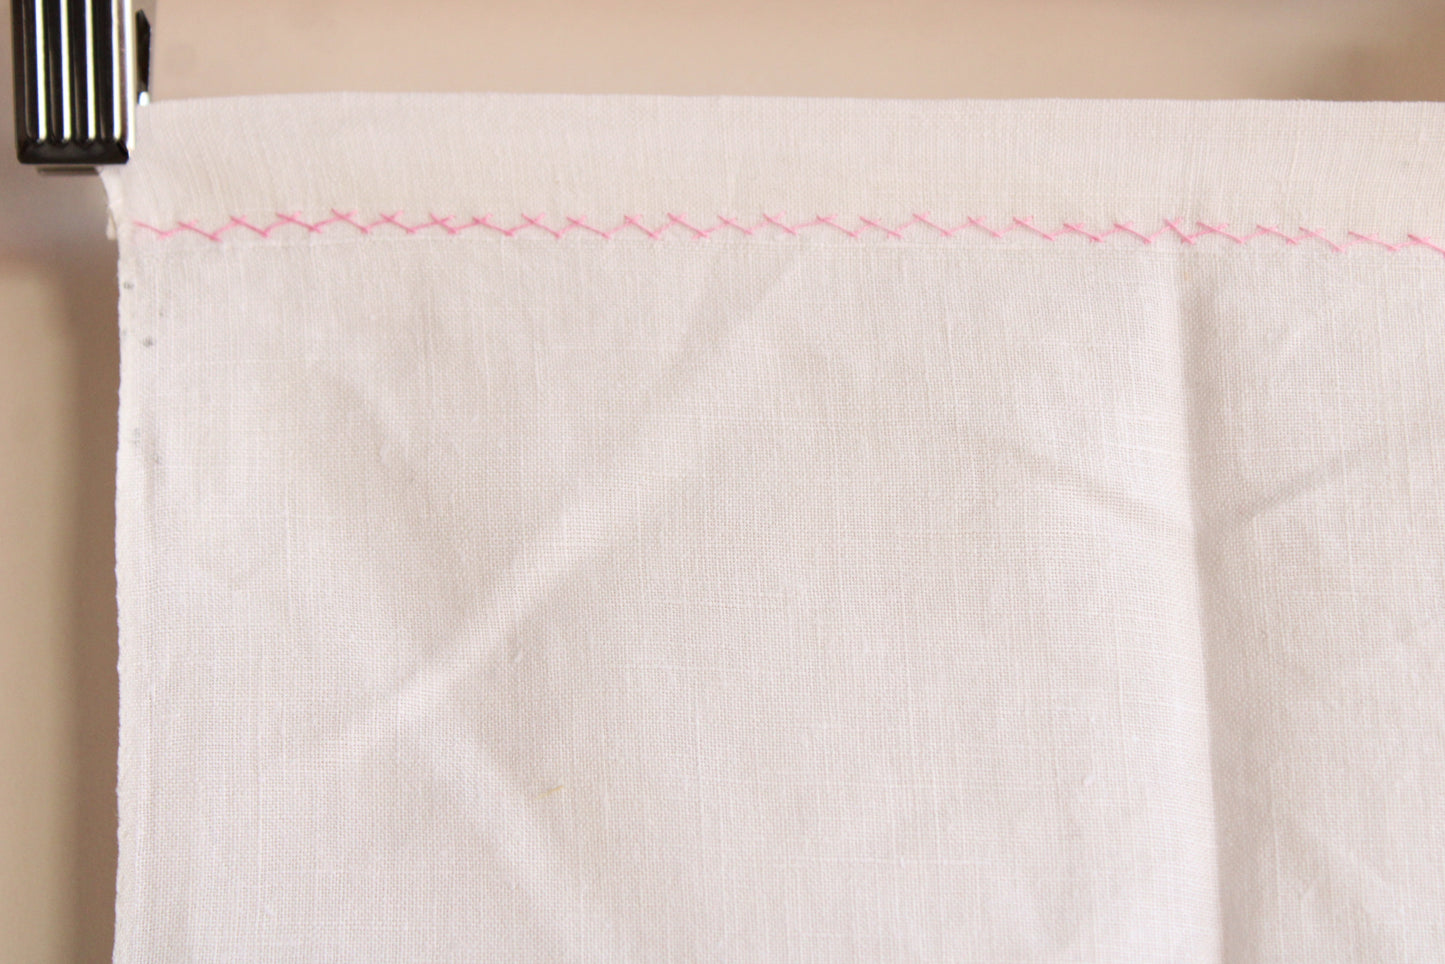 Vintage 1950s Cross Stitched Hand Towel